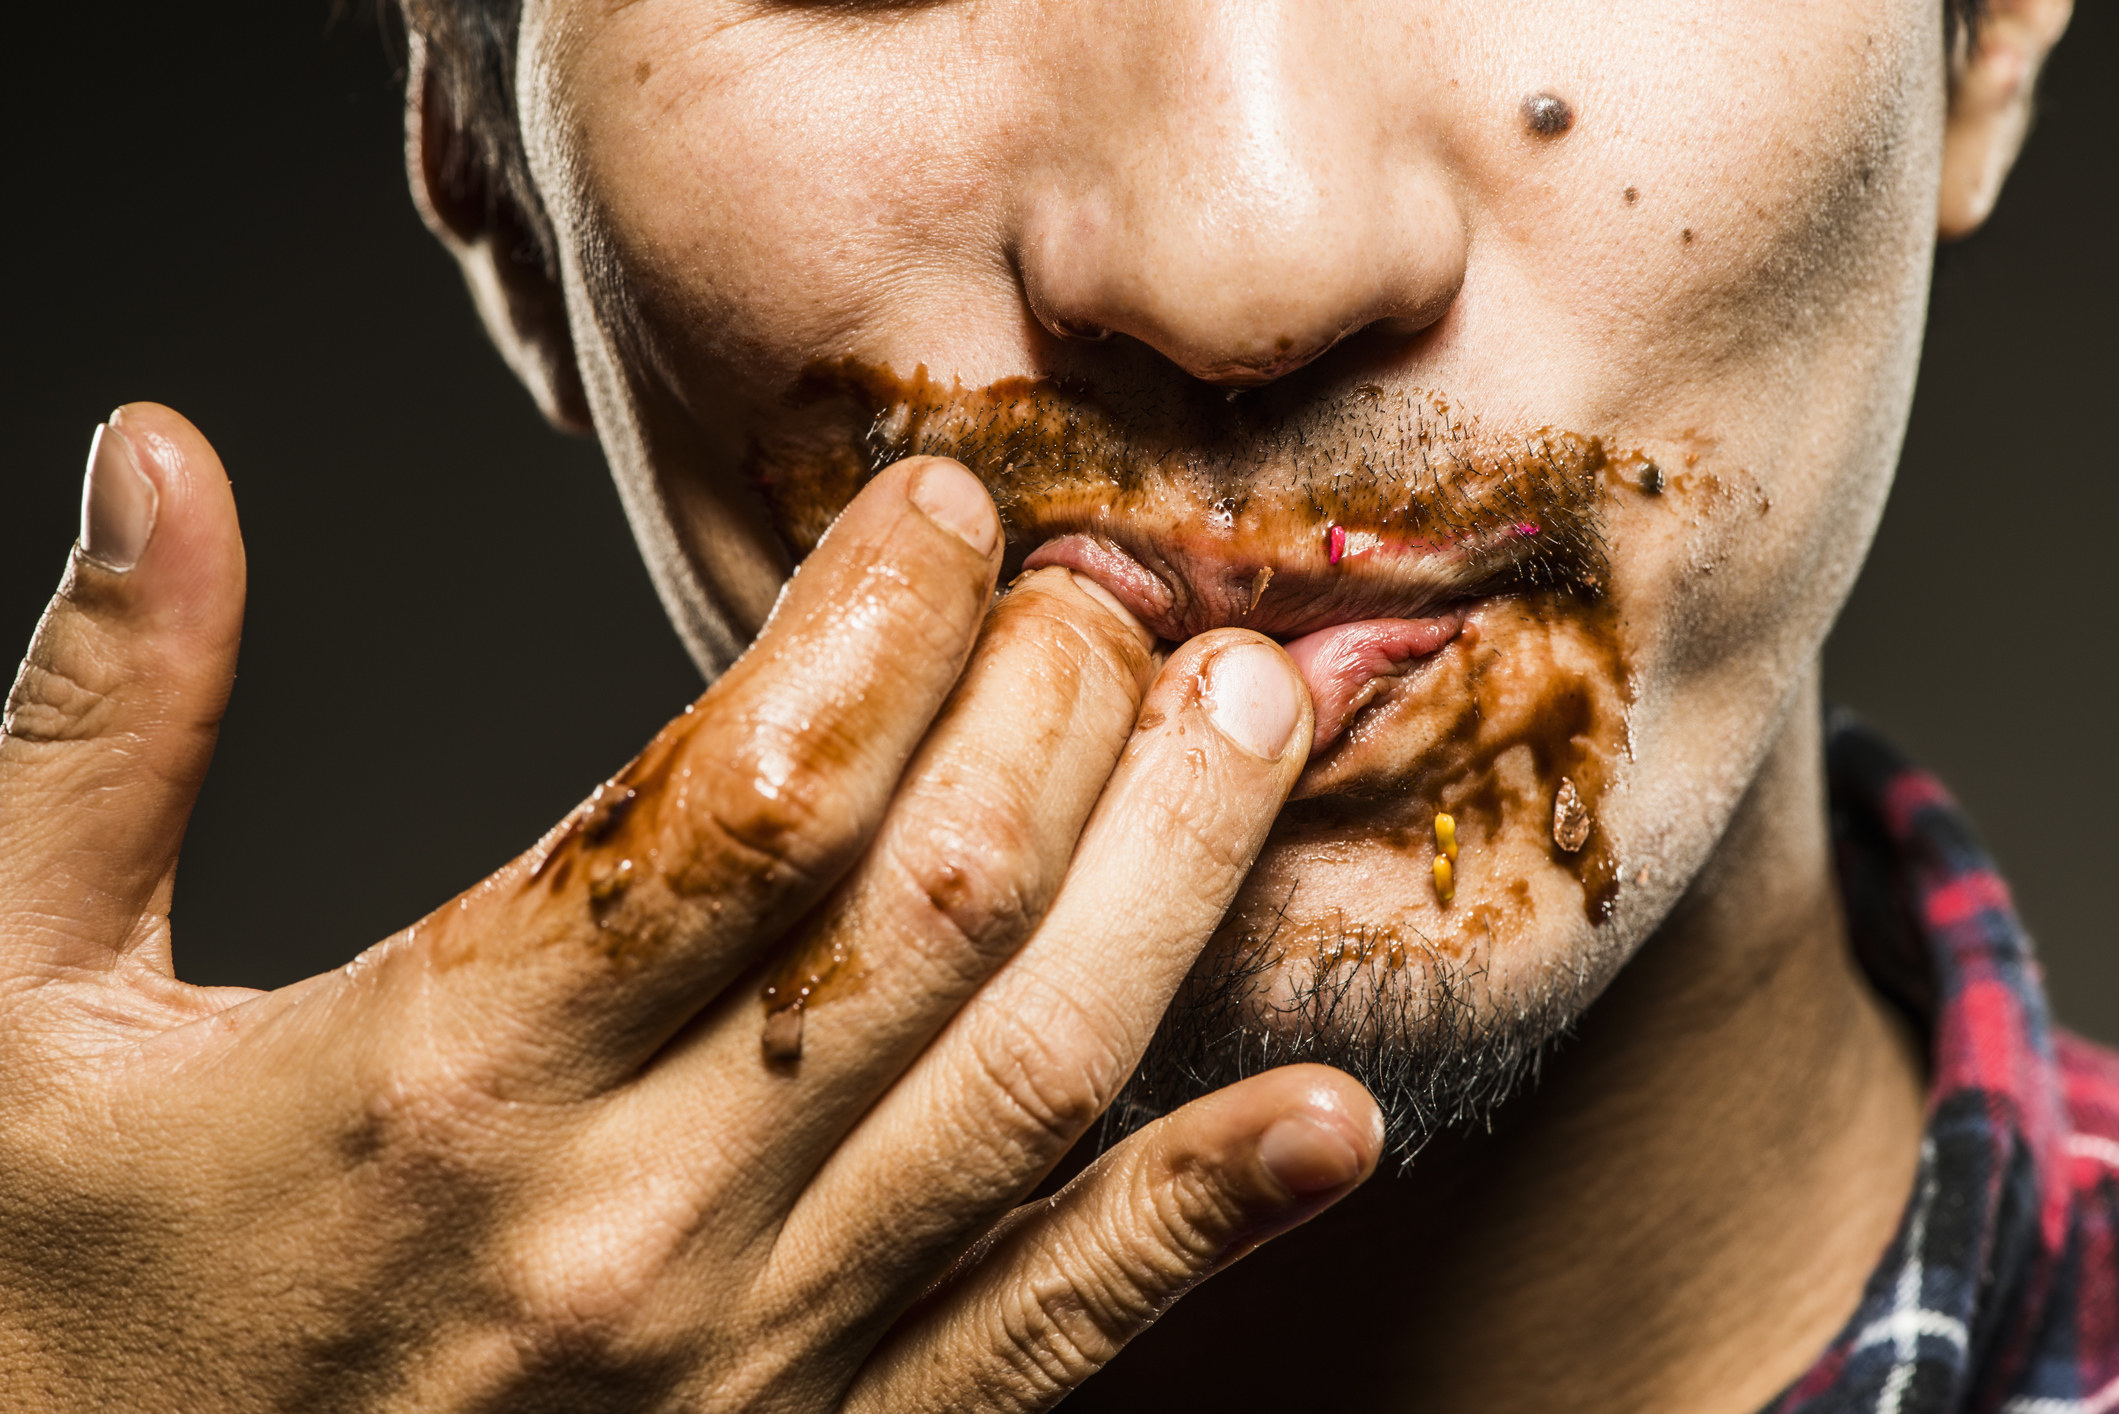 Man licking dirty fingers after eating a meal